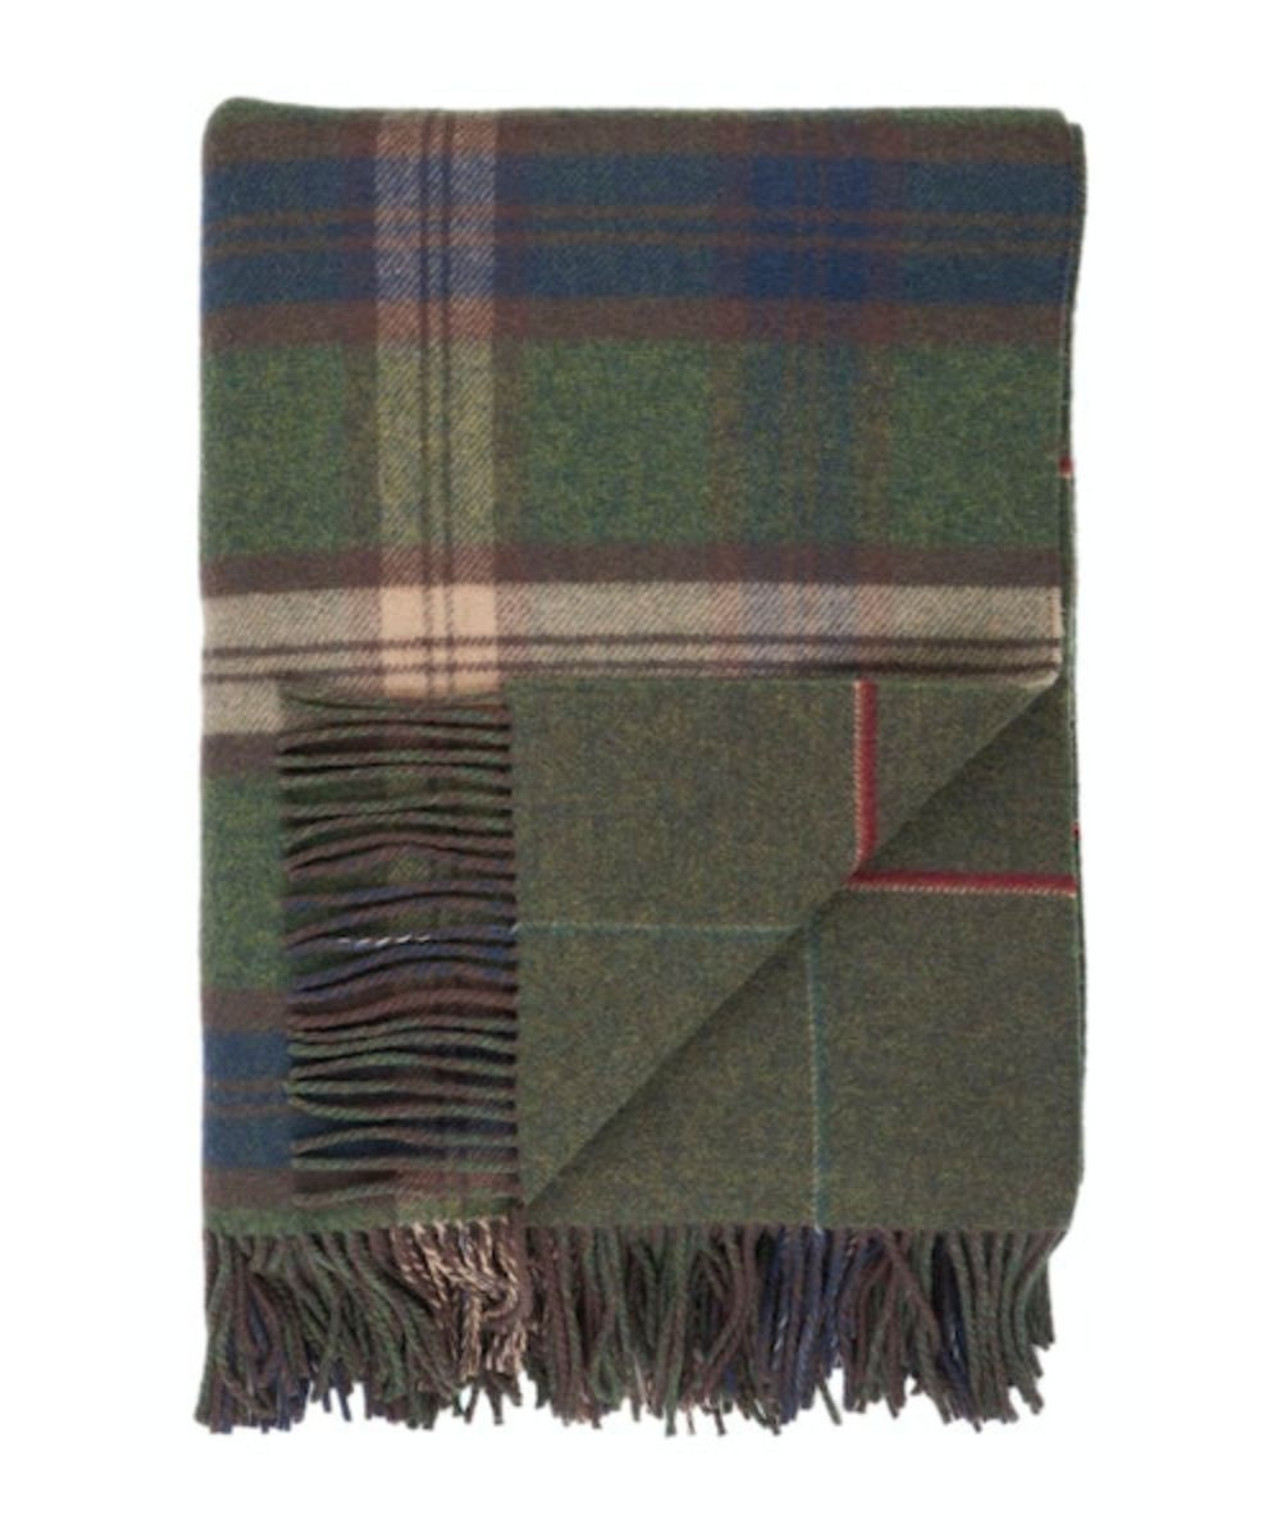 Lambswool Throw Blanket: Johnstons of Elgin Lambswool Double Face Check ...